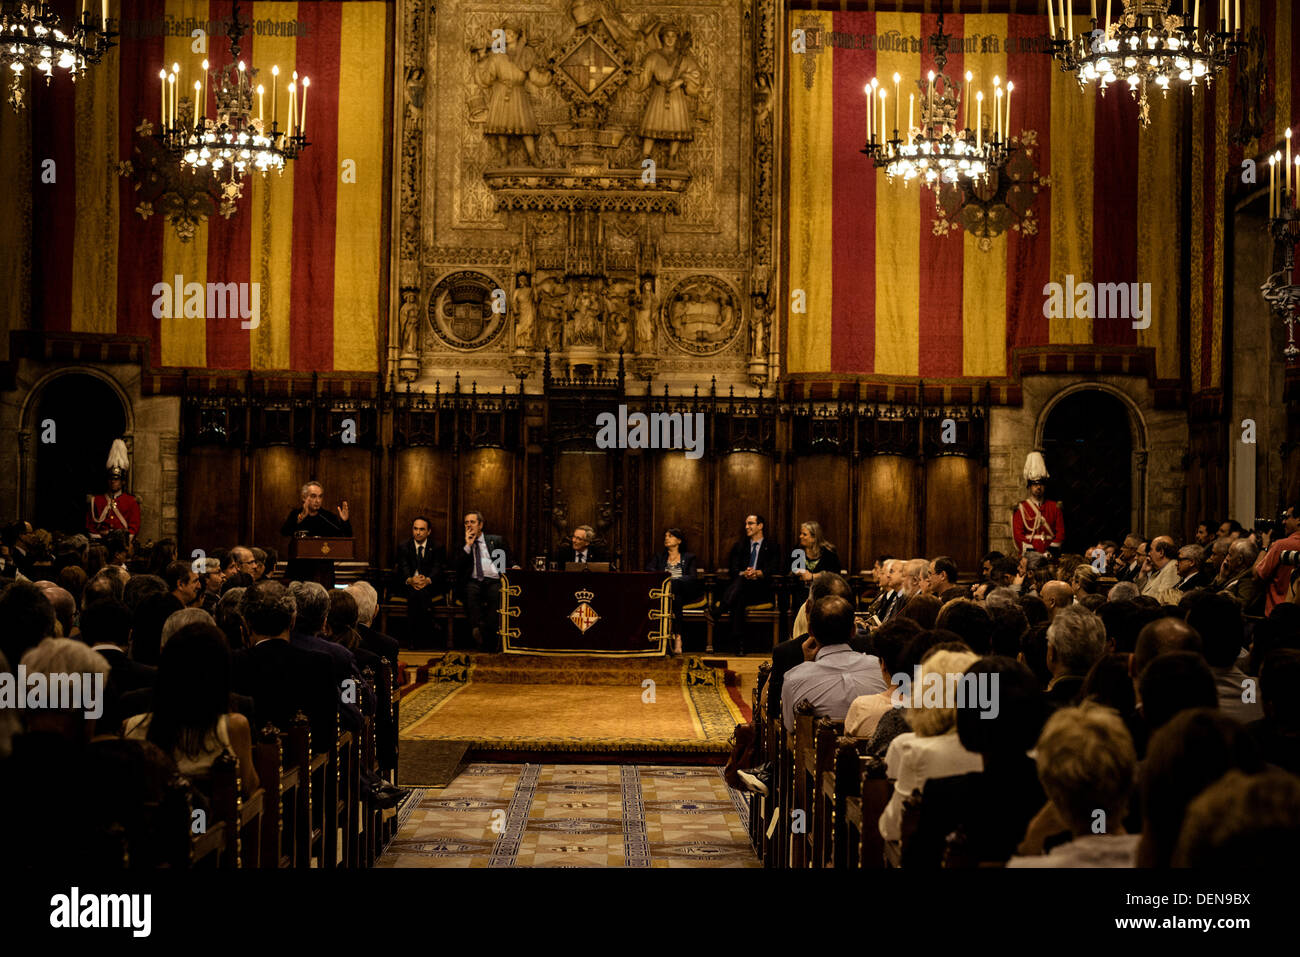 Barcelona, Spain. September 20th, 2013: Ferran Adria, famous Catalan star chef, speaks during the official initial act for the city festival in the council chamber to invited guests Credit:  matthi/Alamy Live News Stock Photo